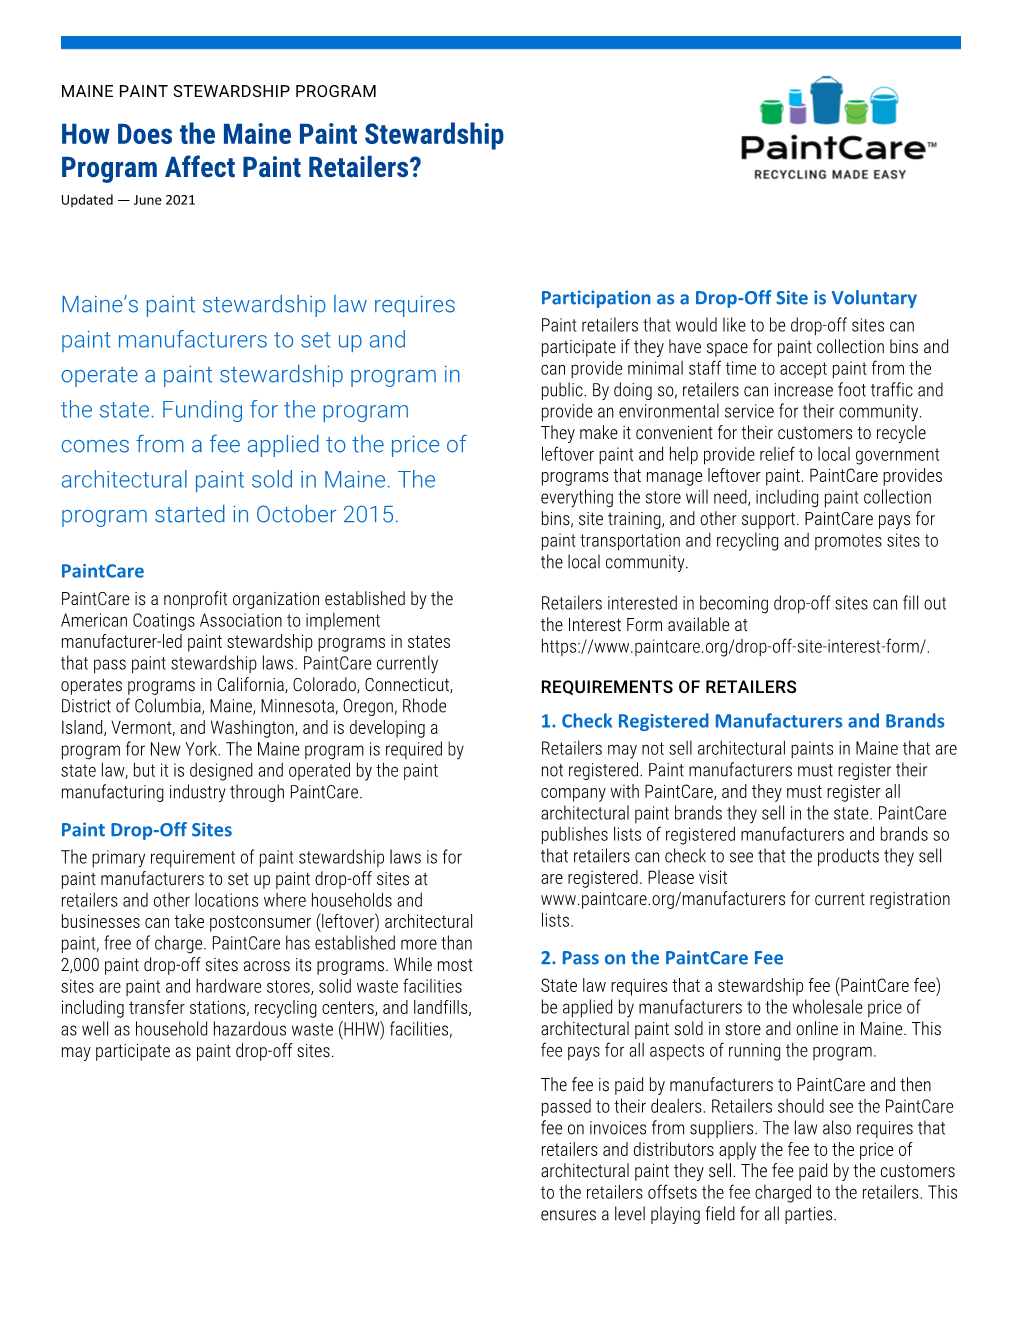 How Does the Maine Paint Stewardship Program Affect Paint Retailers? Updated — June 2021